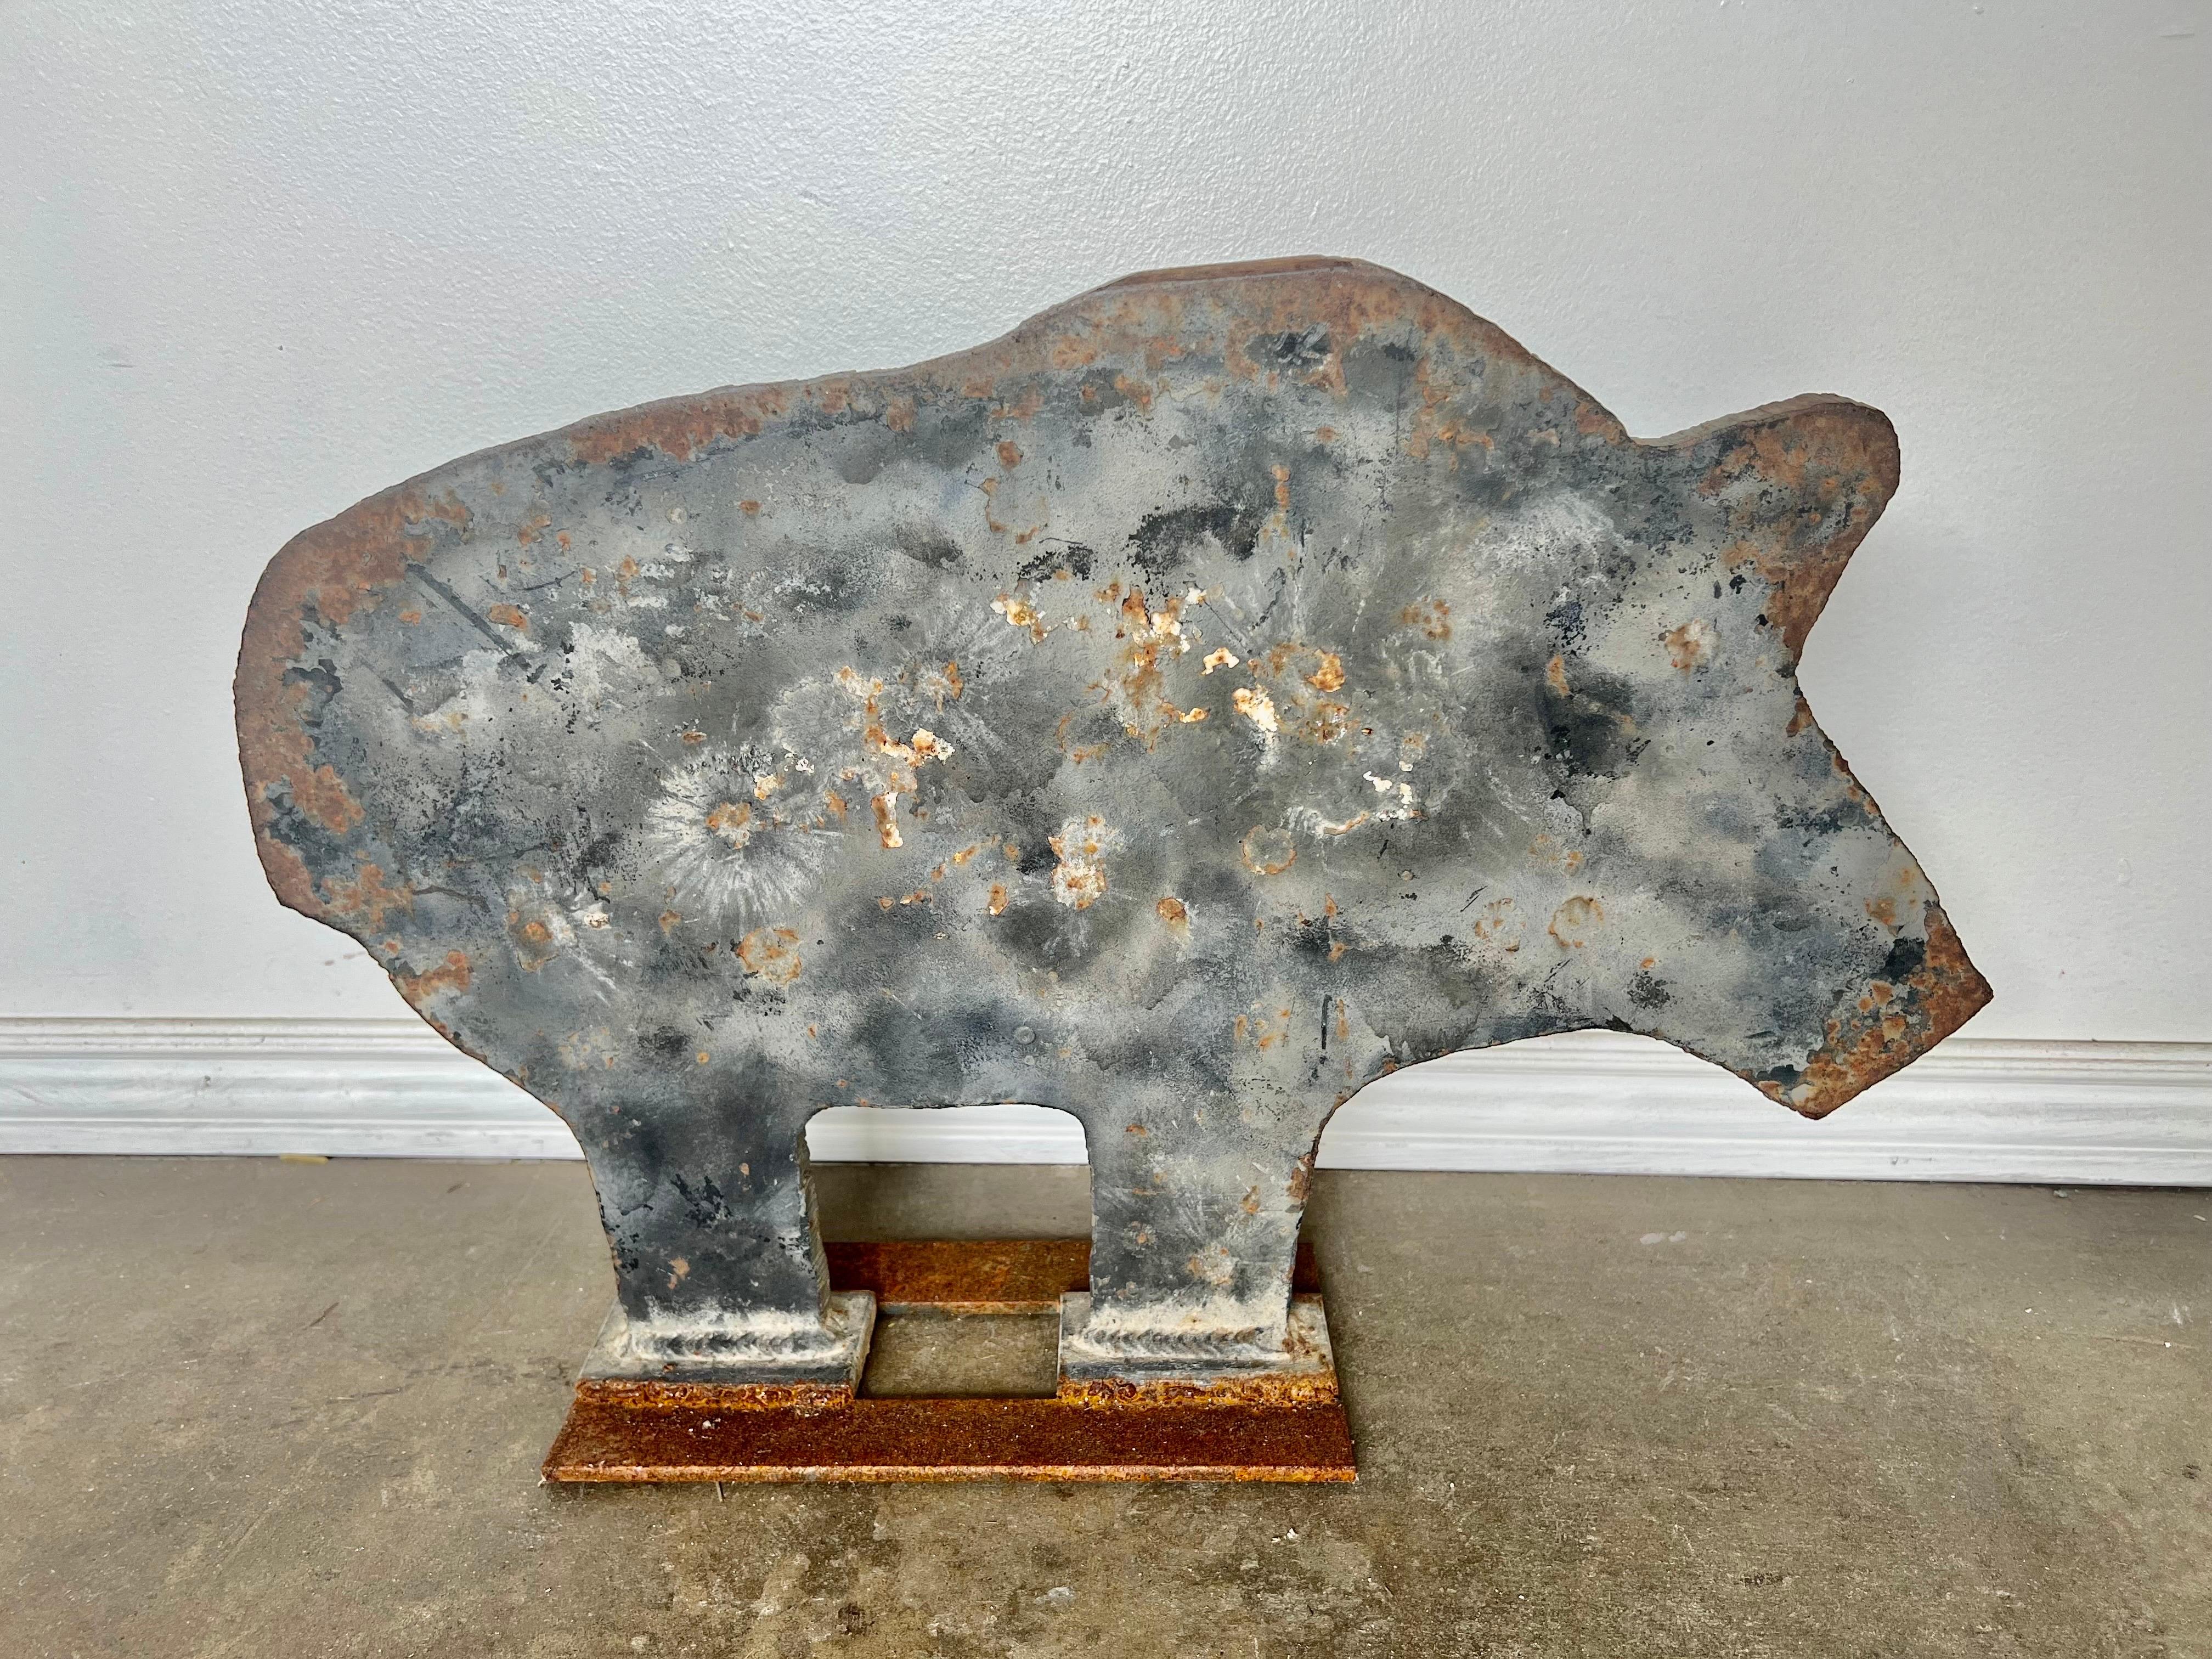 Unique shooting target made from cut steel and iron in the shape of a pig. The piece is quite rusty and weathered from all it's years in use.